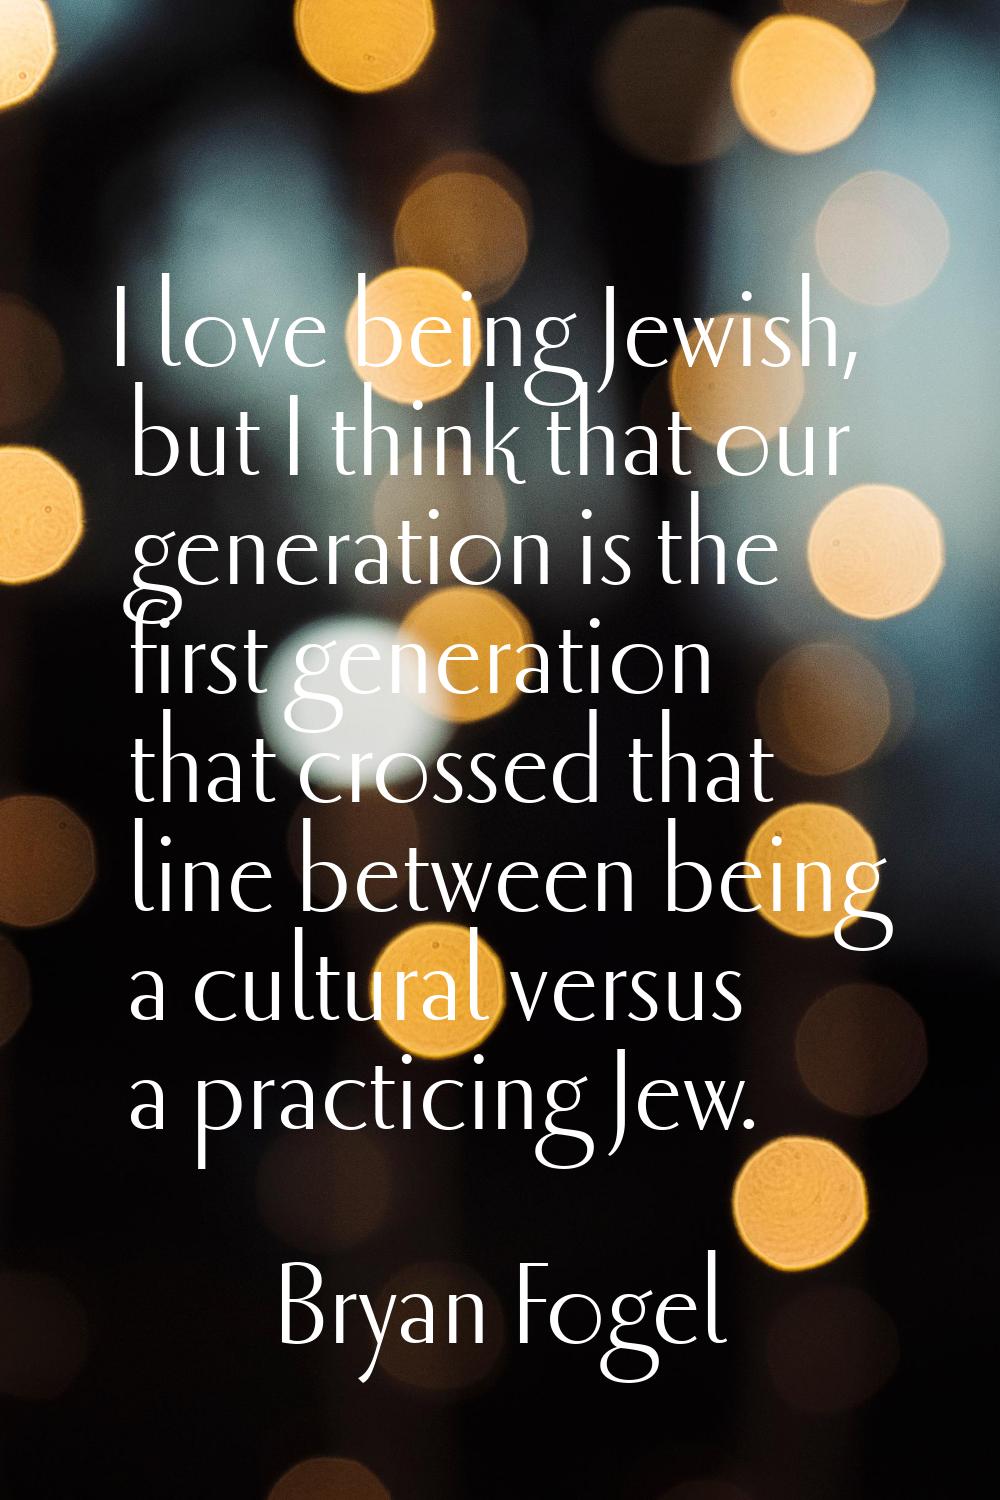 I love being Jewish, but I think that our generation is the first generation that crossed that line